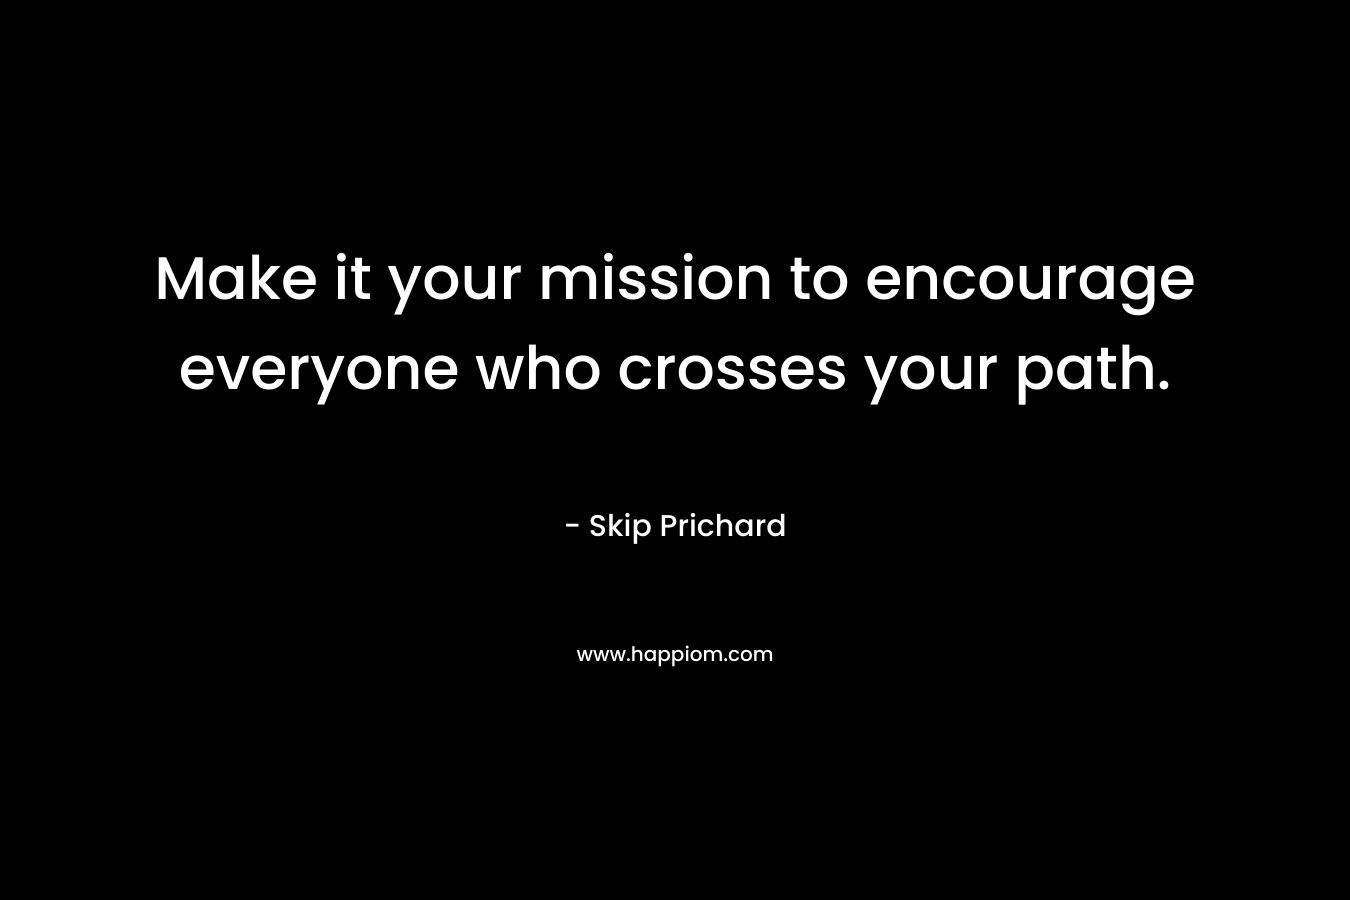 Make it your mission to encourage everyone who crosses your path.